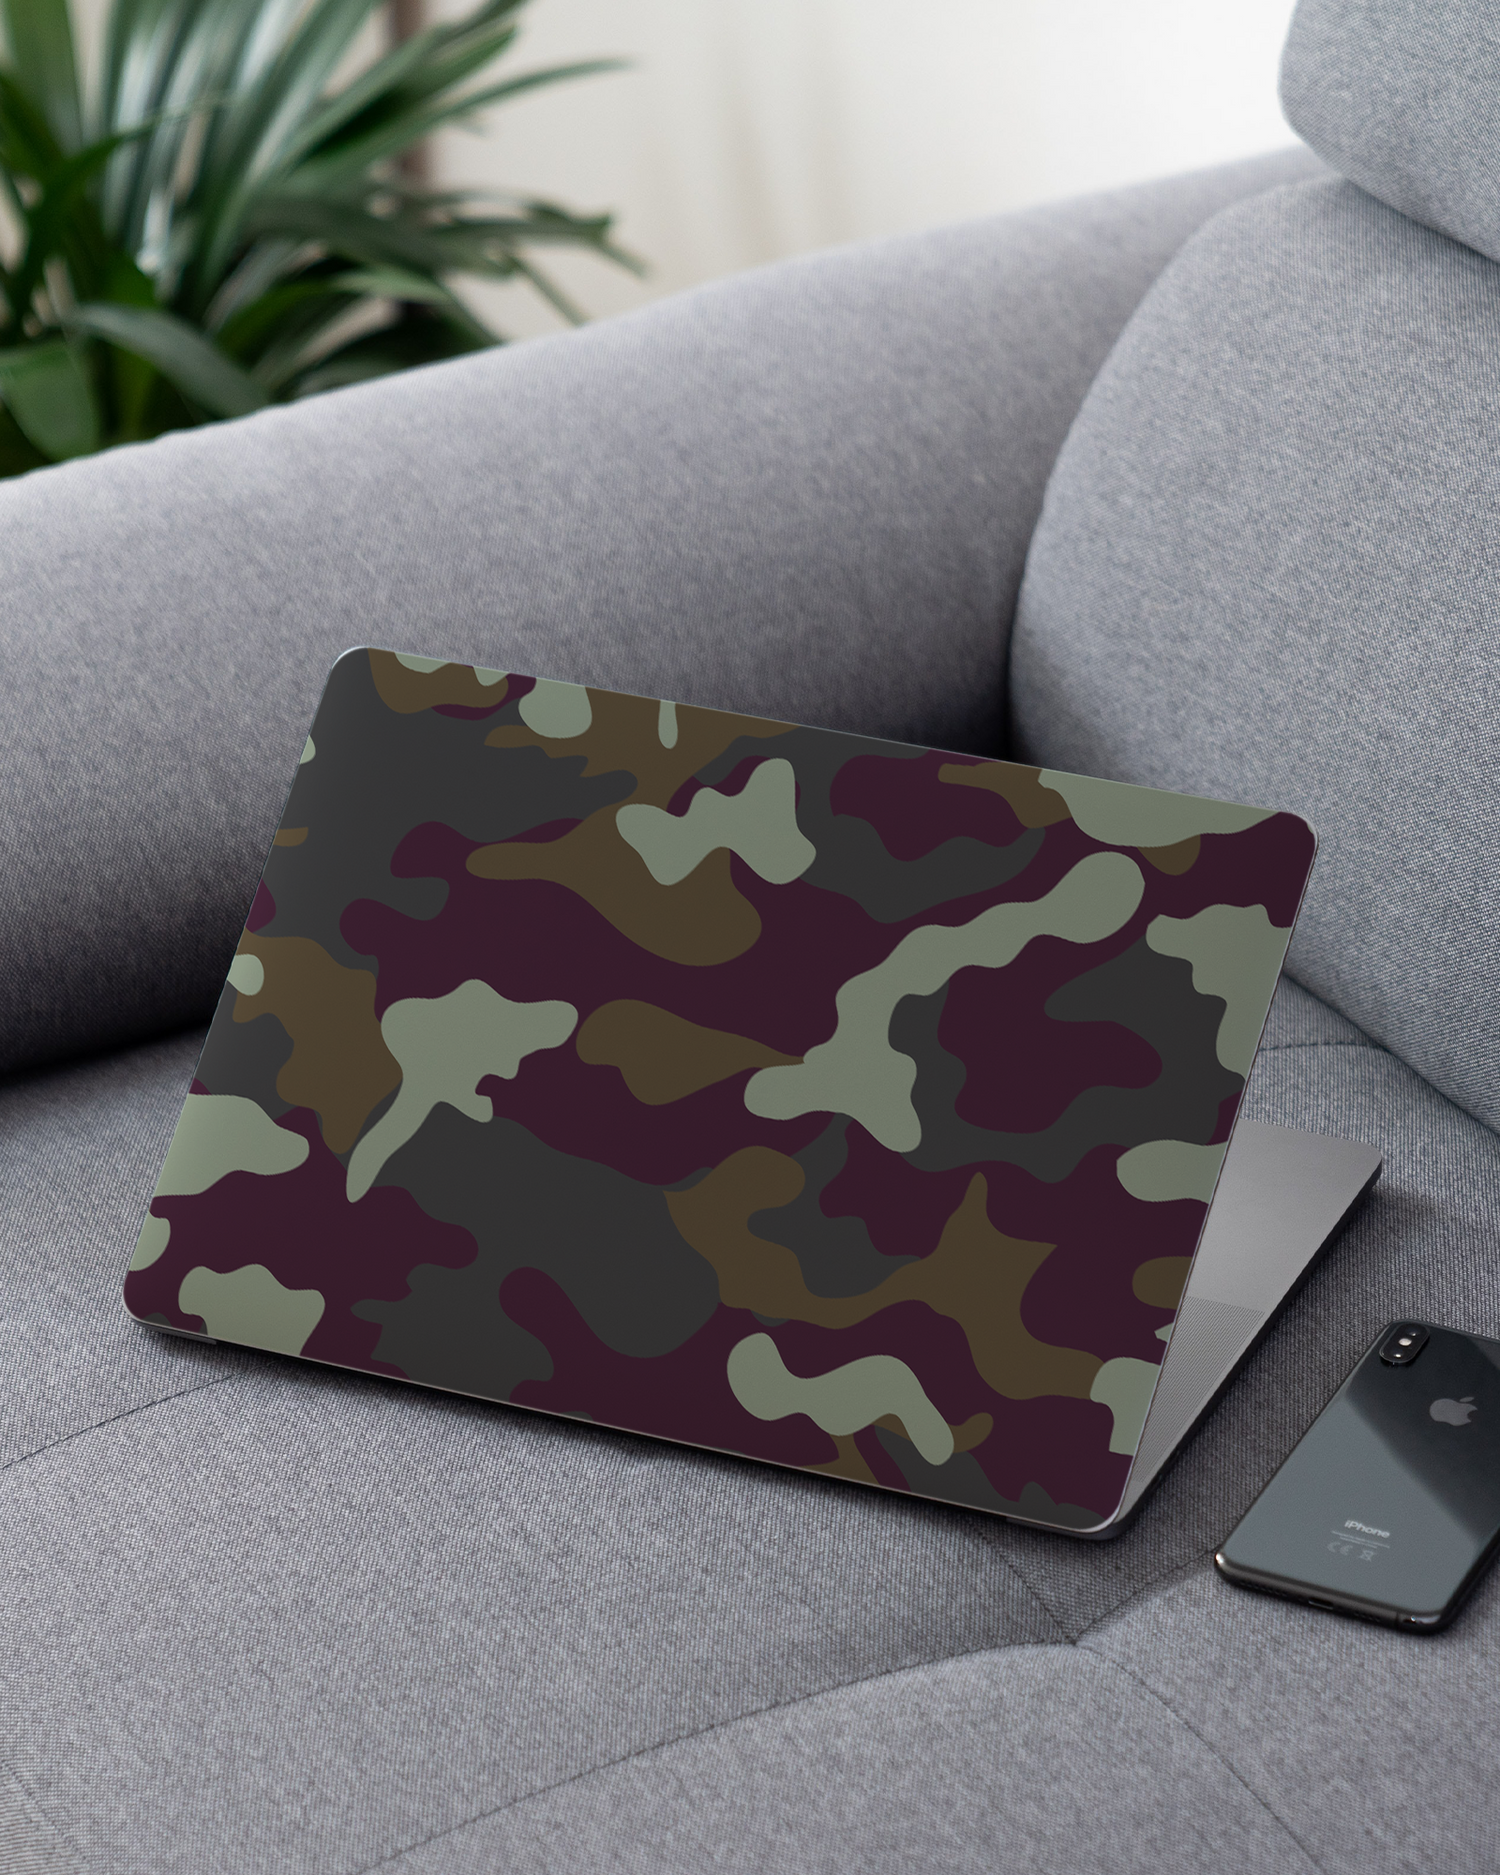 Night Camo Laptop Skin for 13 inch Apple MacBooks on a couch